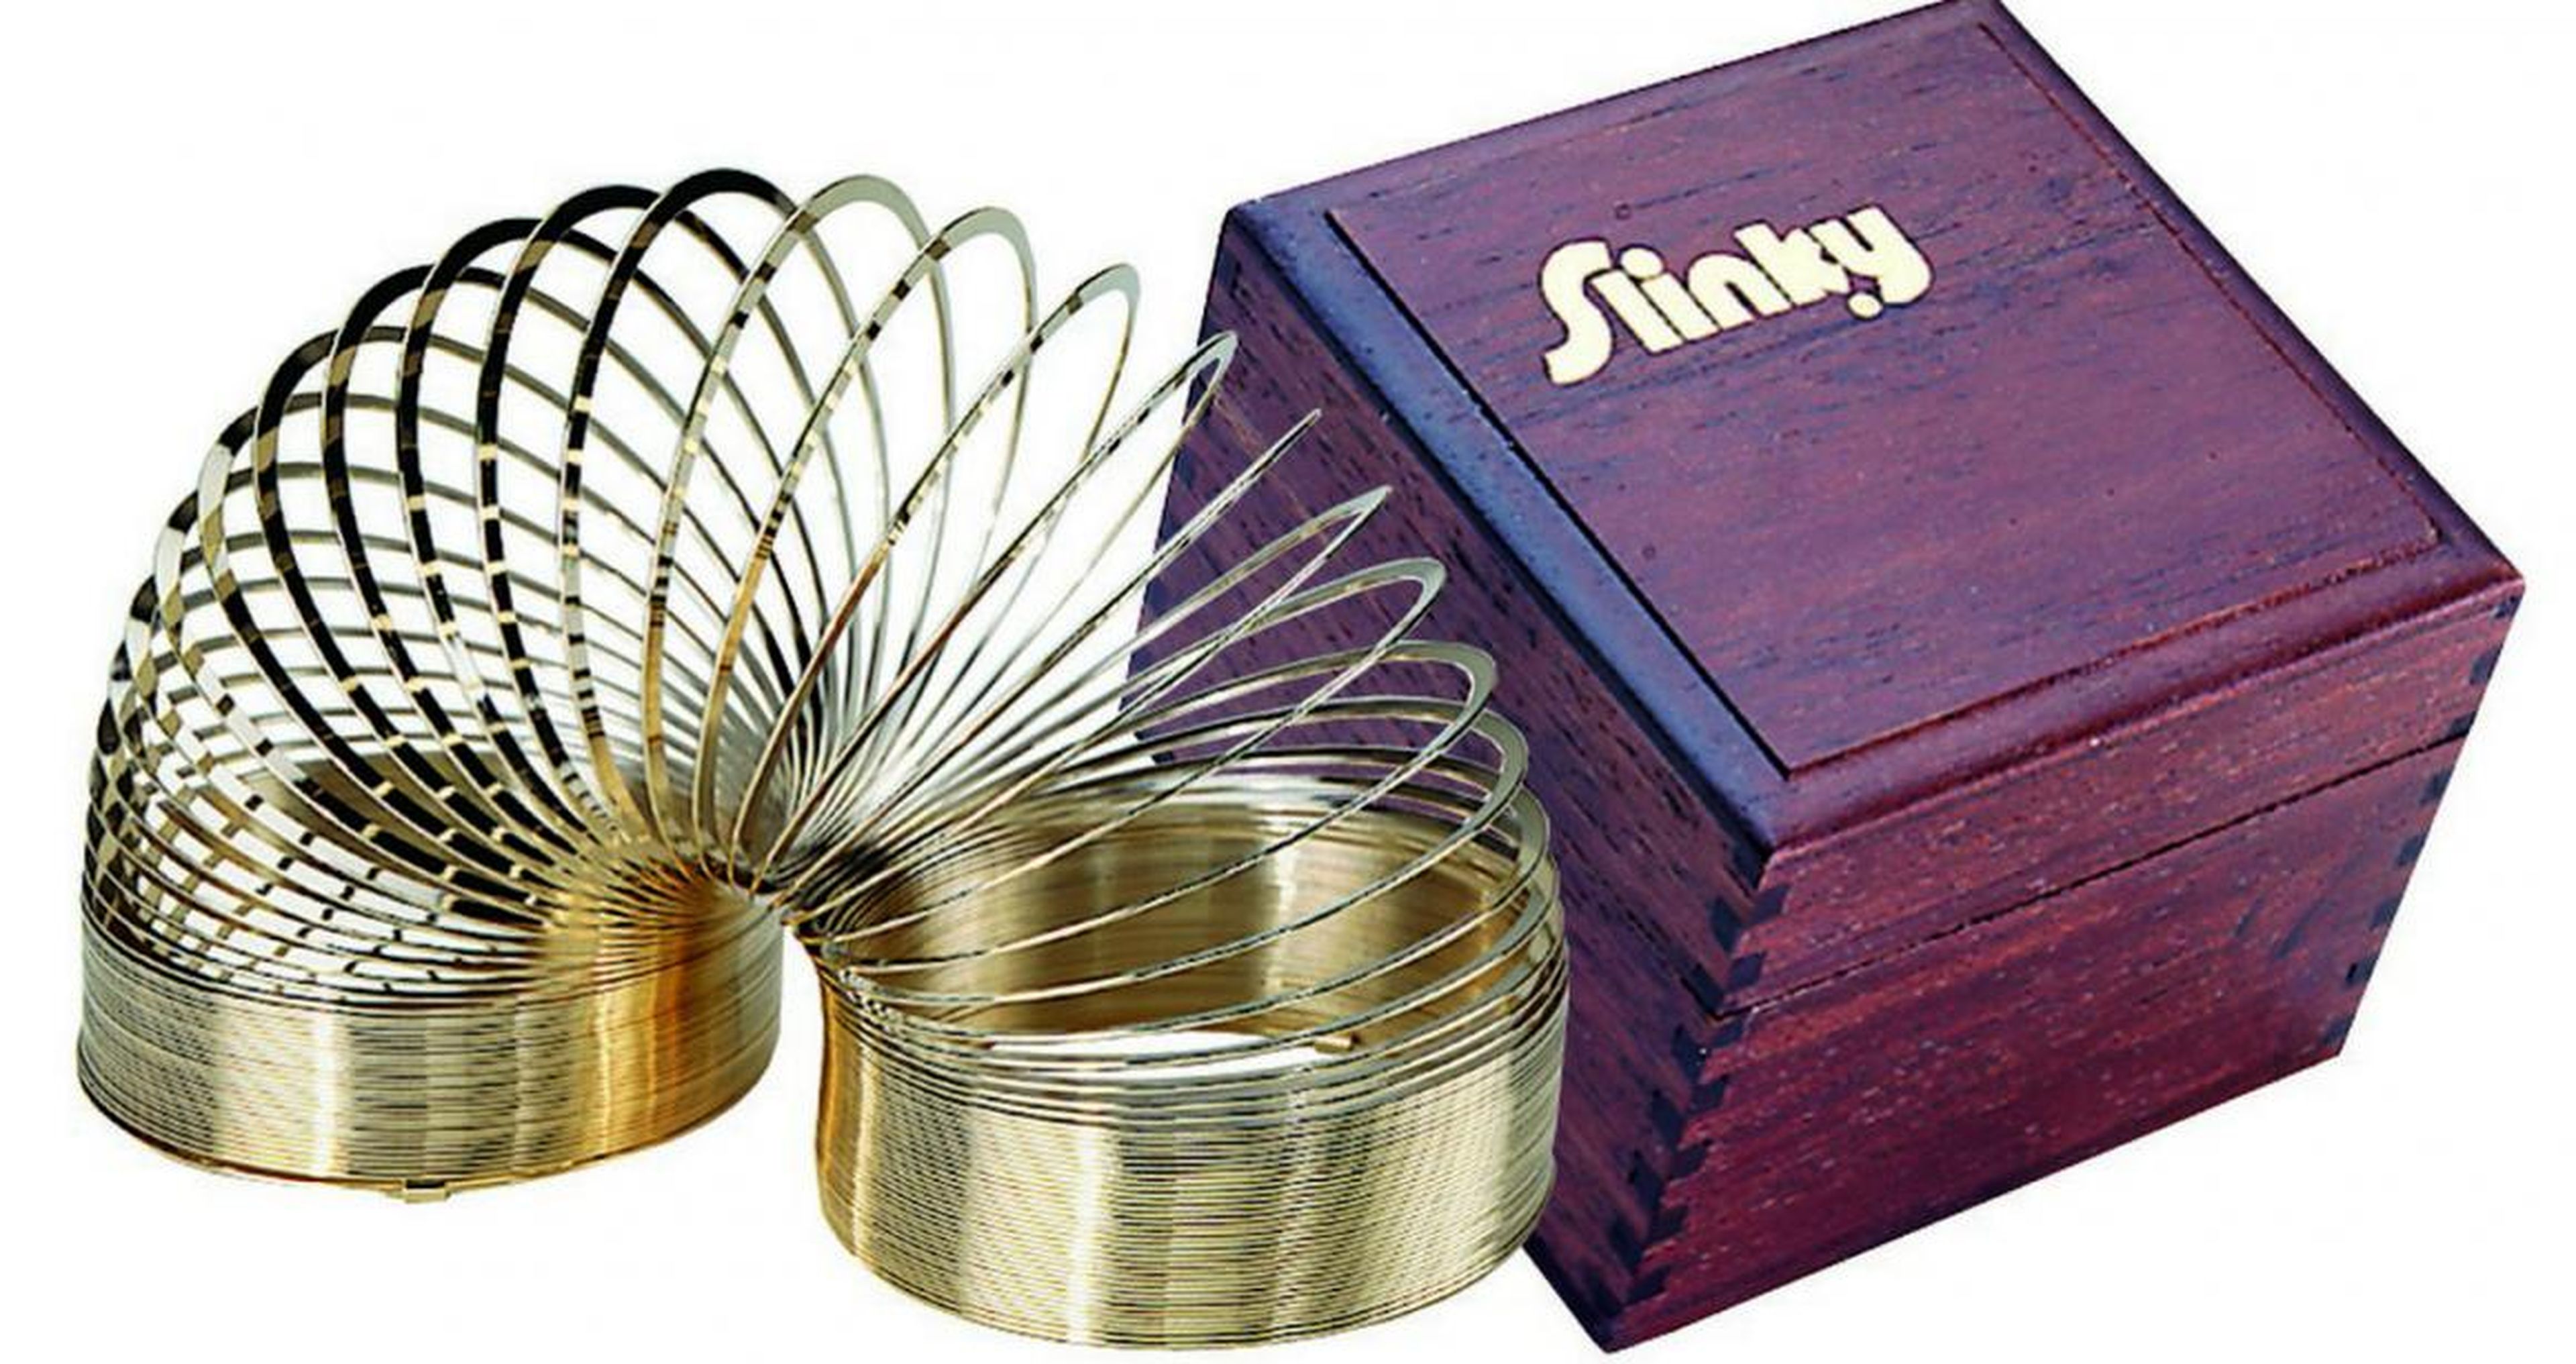 The Slinky wouldn't exist without its creator's fumble.